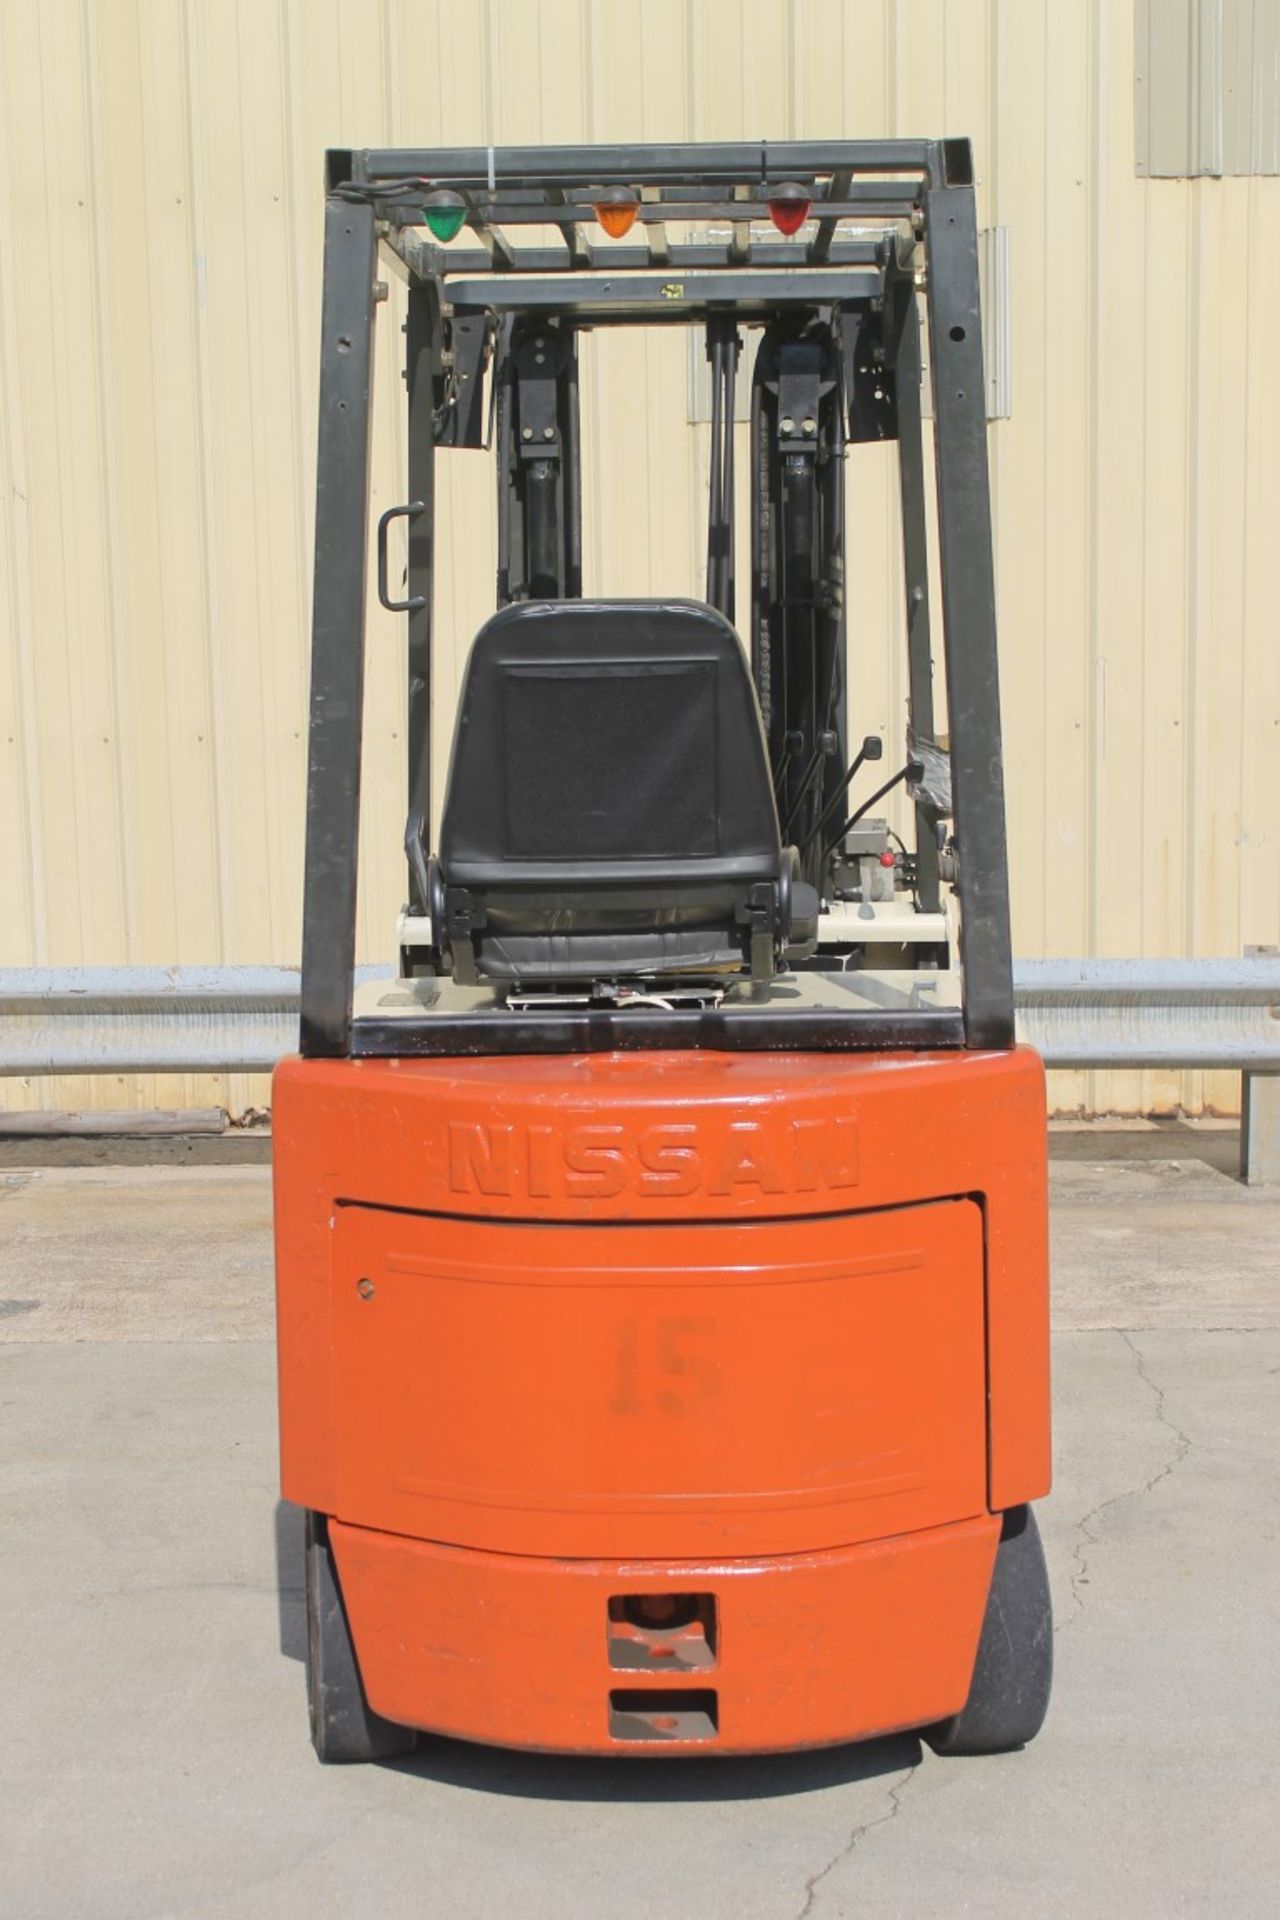 2003 NISSAN 4000 LBS CAPACITY ELECTRIC FORKLIFT WITH 2012 BATTERY, (WATCH VIDEO) - Image 5 of 5